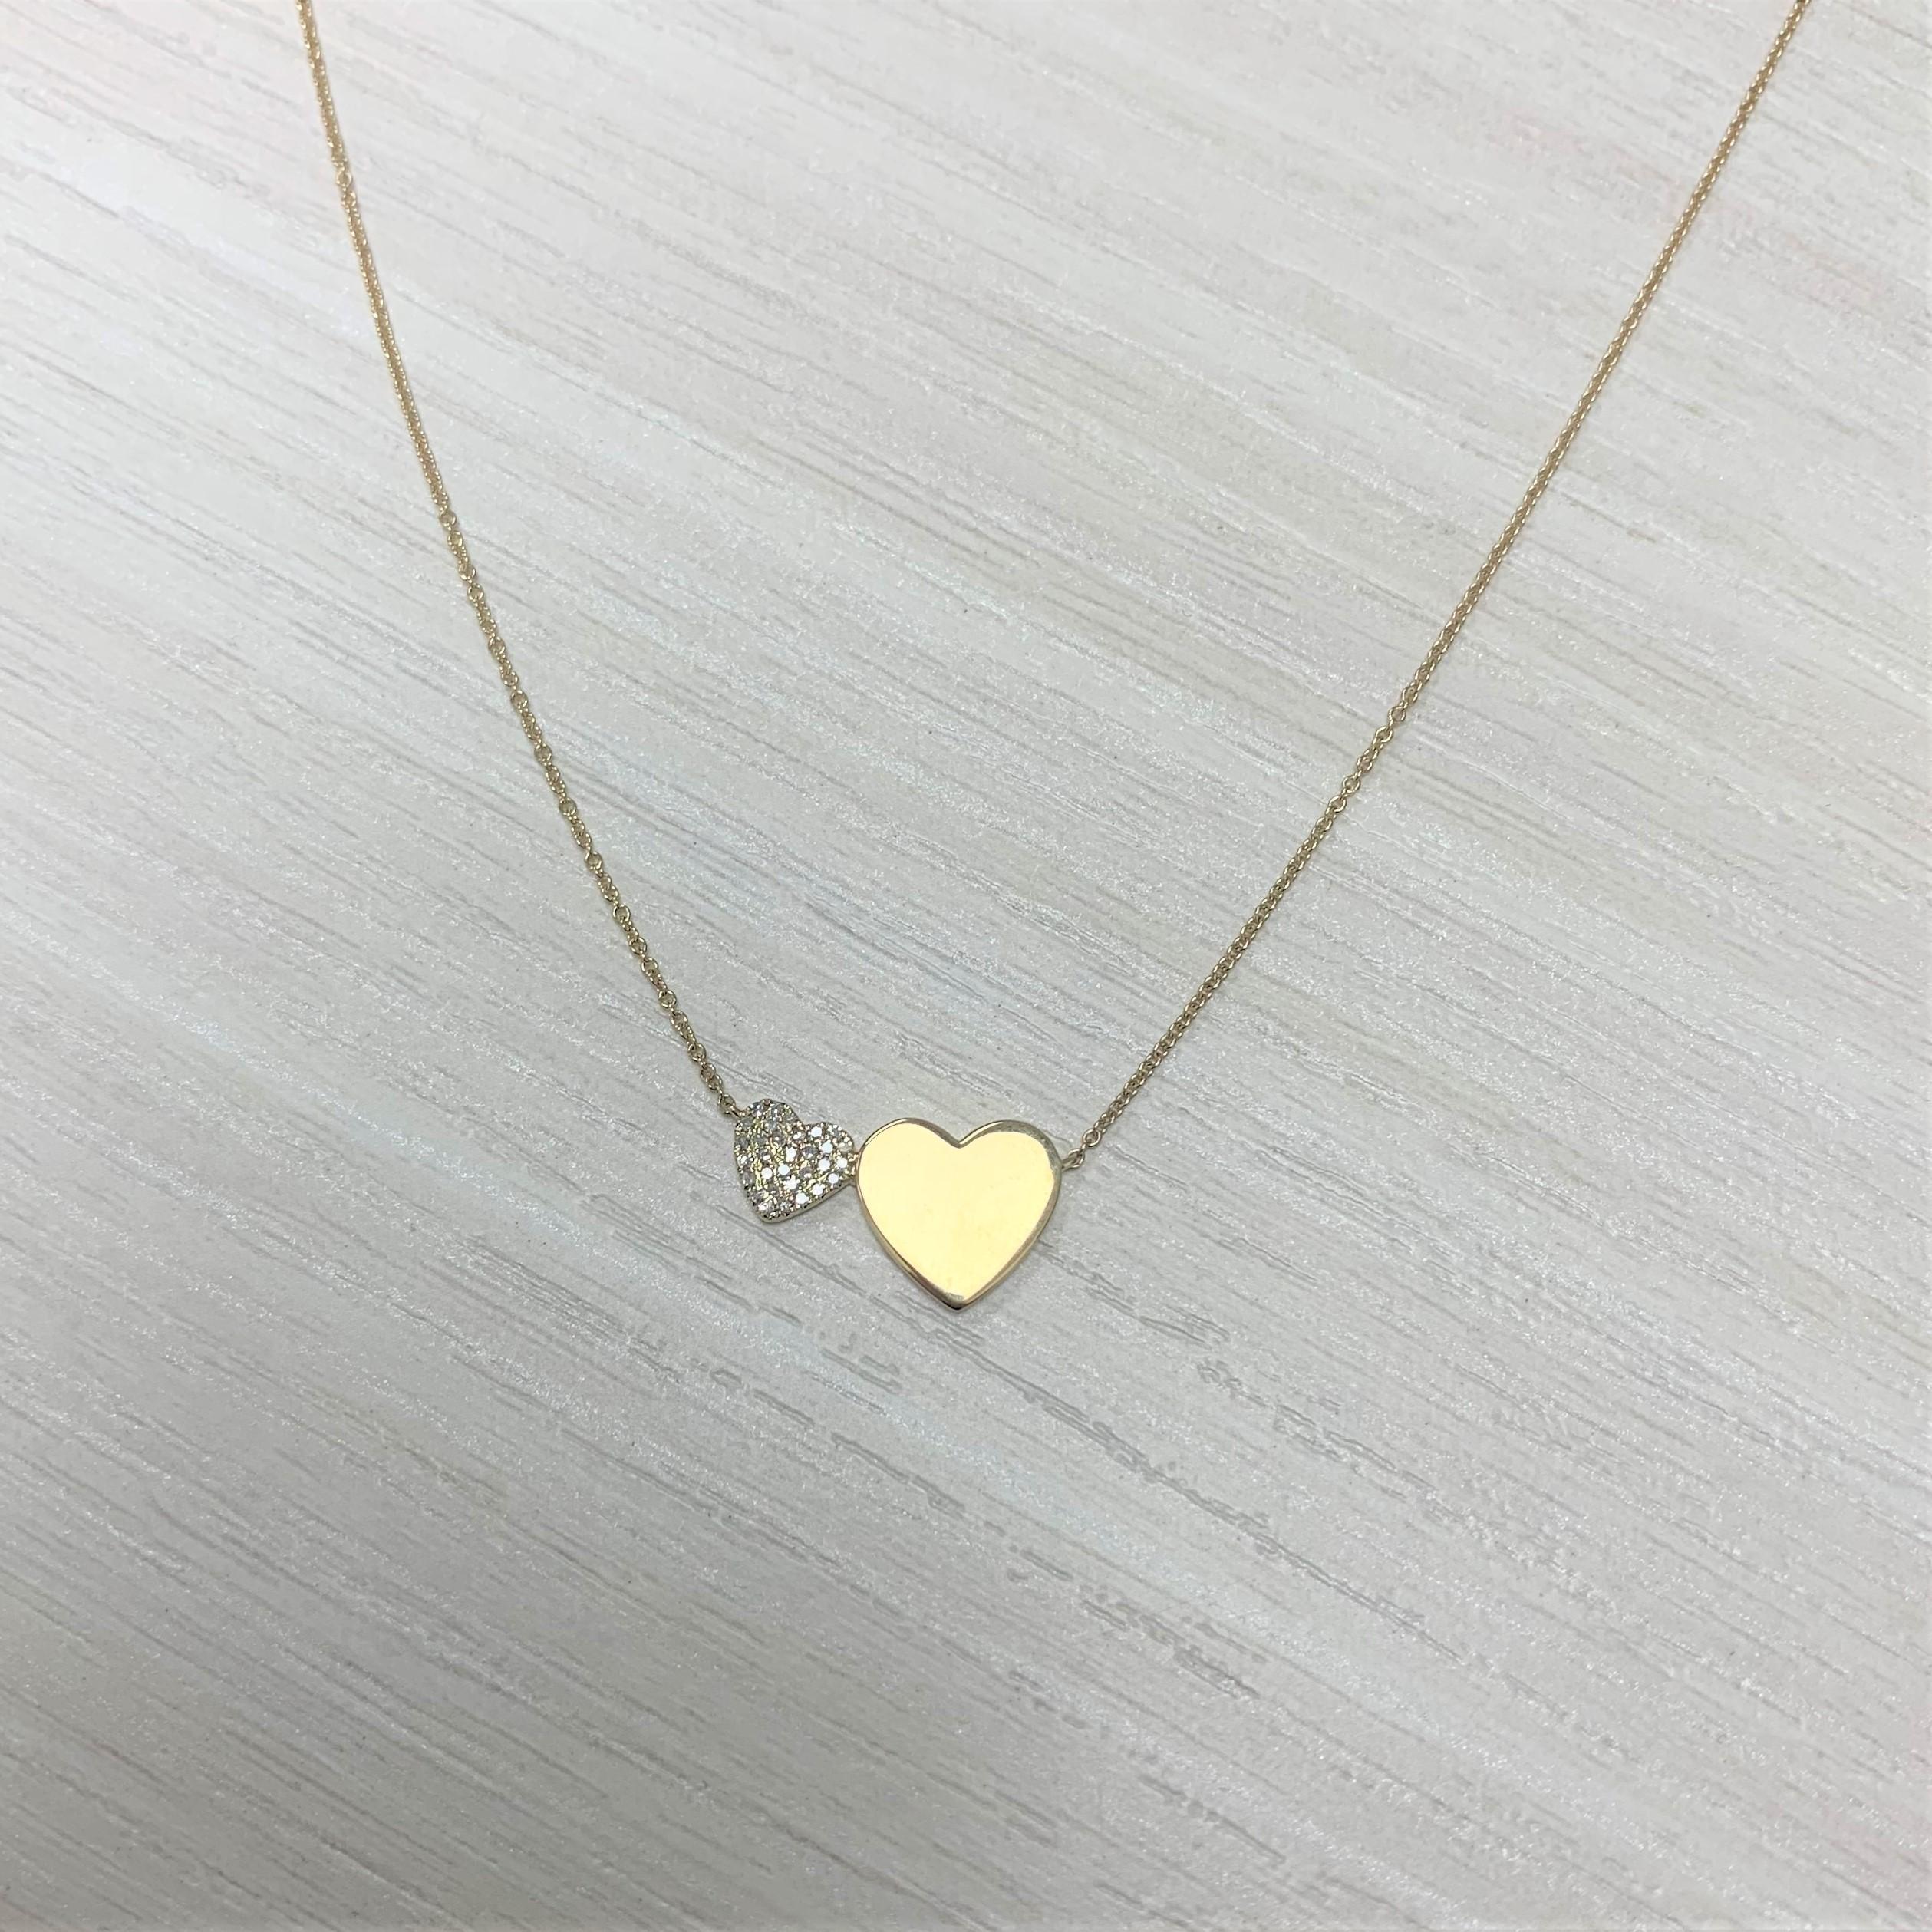 The brilliance of love. This diamond necklace features 0.09 ct of round sparkly diamonds, pavé-set in a heart shape made of 14k yellow gold, with a matching cable chain necklace.  
-14K Gold
-Diamond Weight: 0.09 carats Natural White